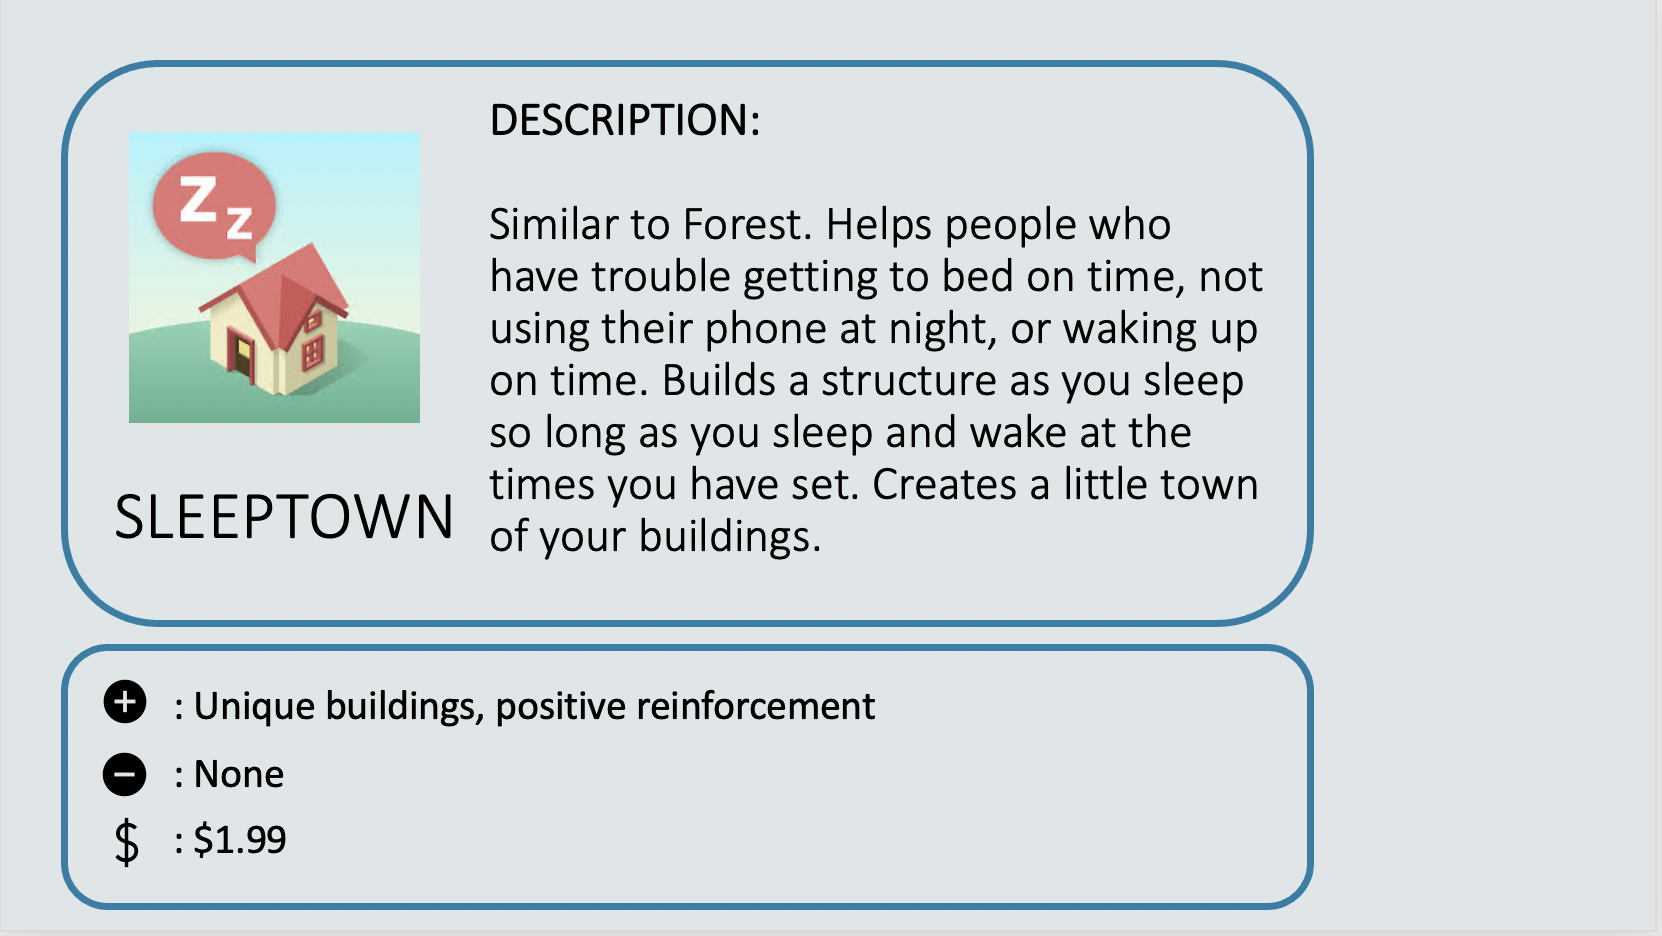 SLEEPTOWN - Similar to Forest. Helps people who have trouble getting to bed on time, not using their phone at night, or waking up on time. Builds a structure as you sleep so long as you sleep and wake at the times you have set. Creates a little town of your buildings. Positive: Unique buildings, positive reinforcement. Negative: None. Cost: $1.99.